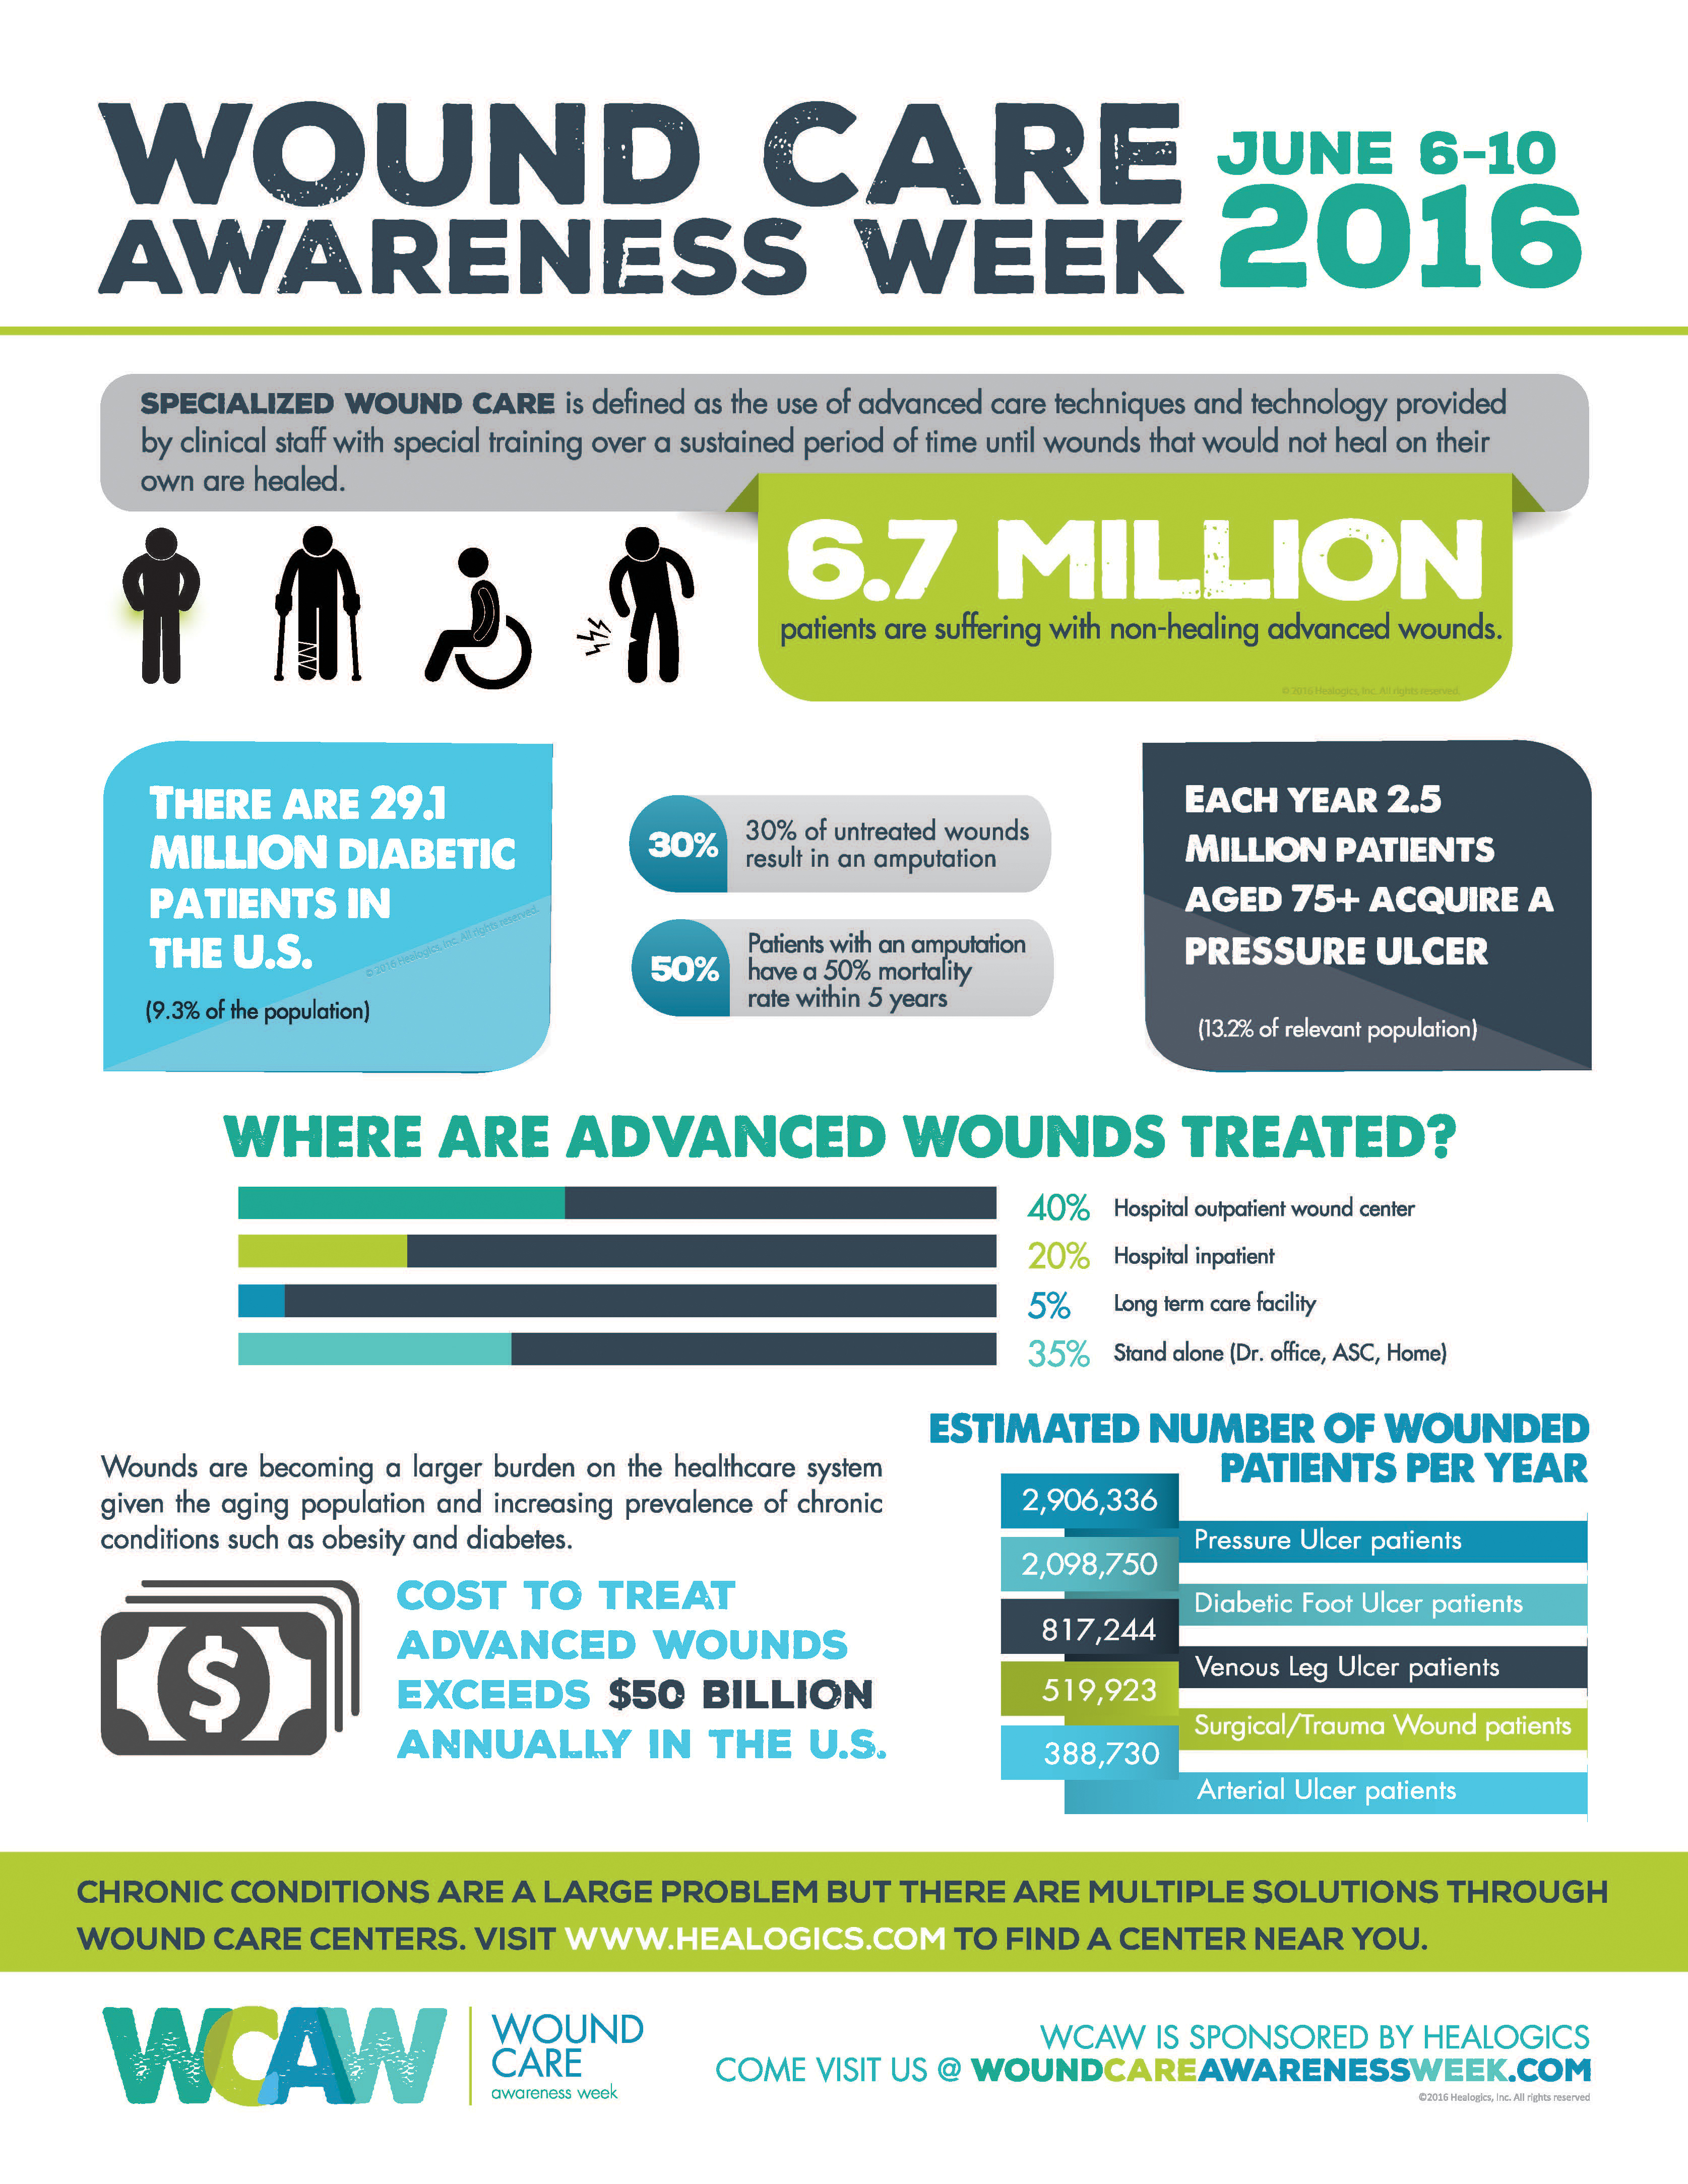 Wound Care Awareness Week Highlights Chronic Wound Epidemic in U.S